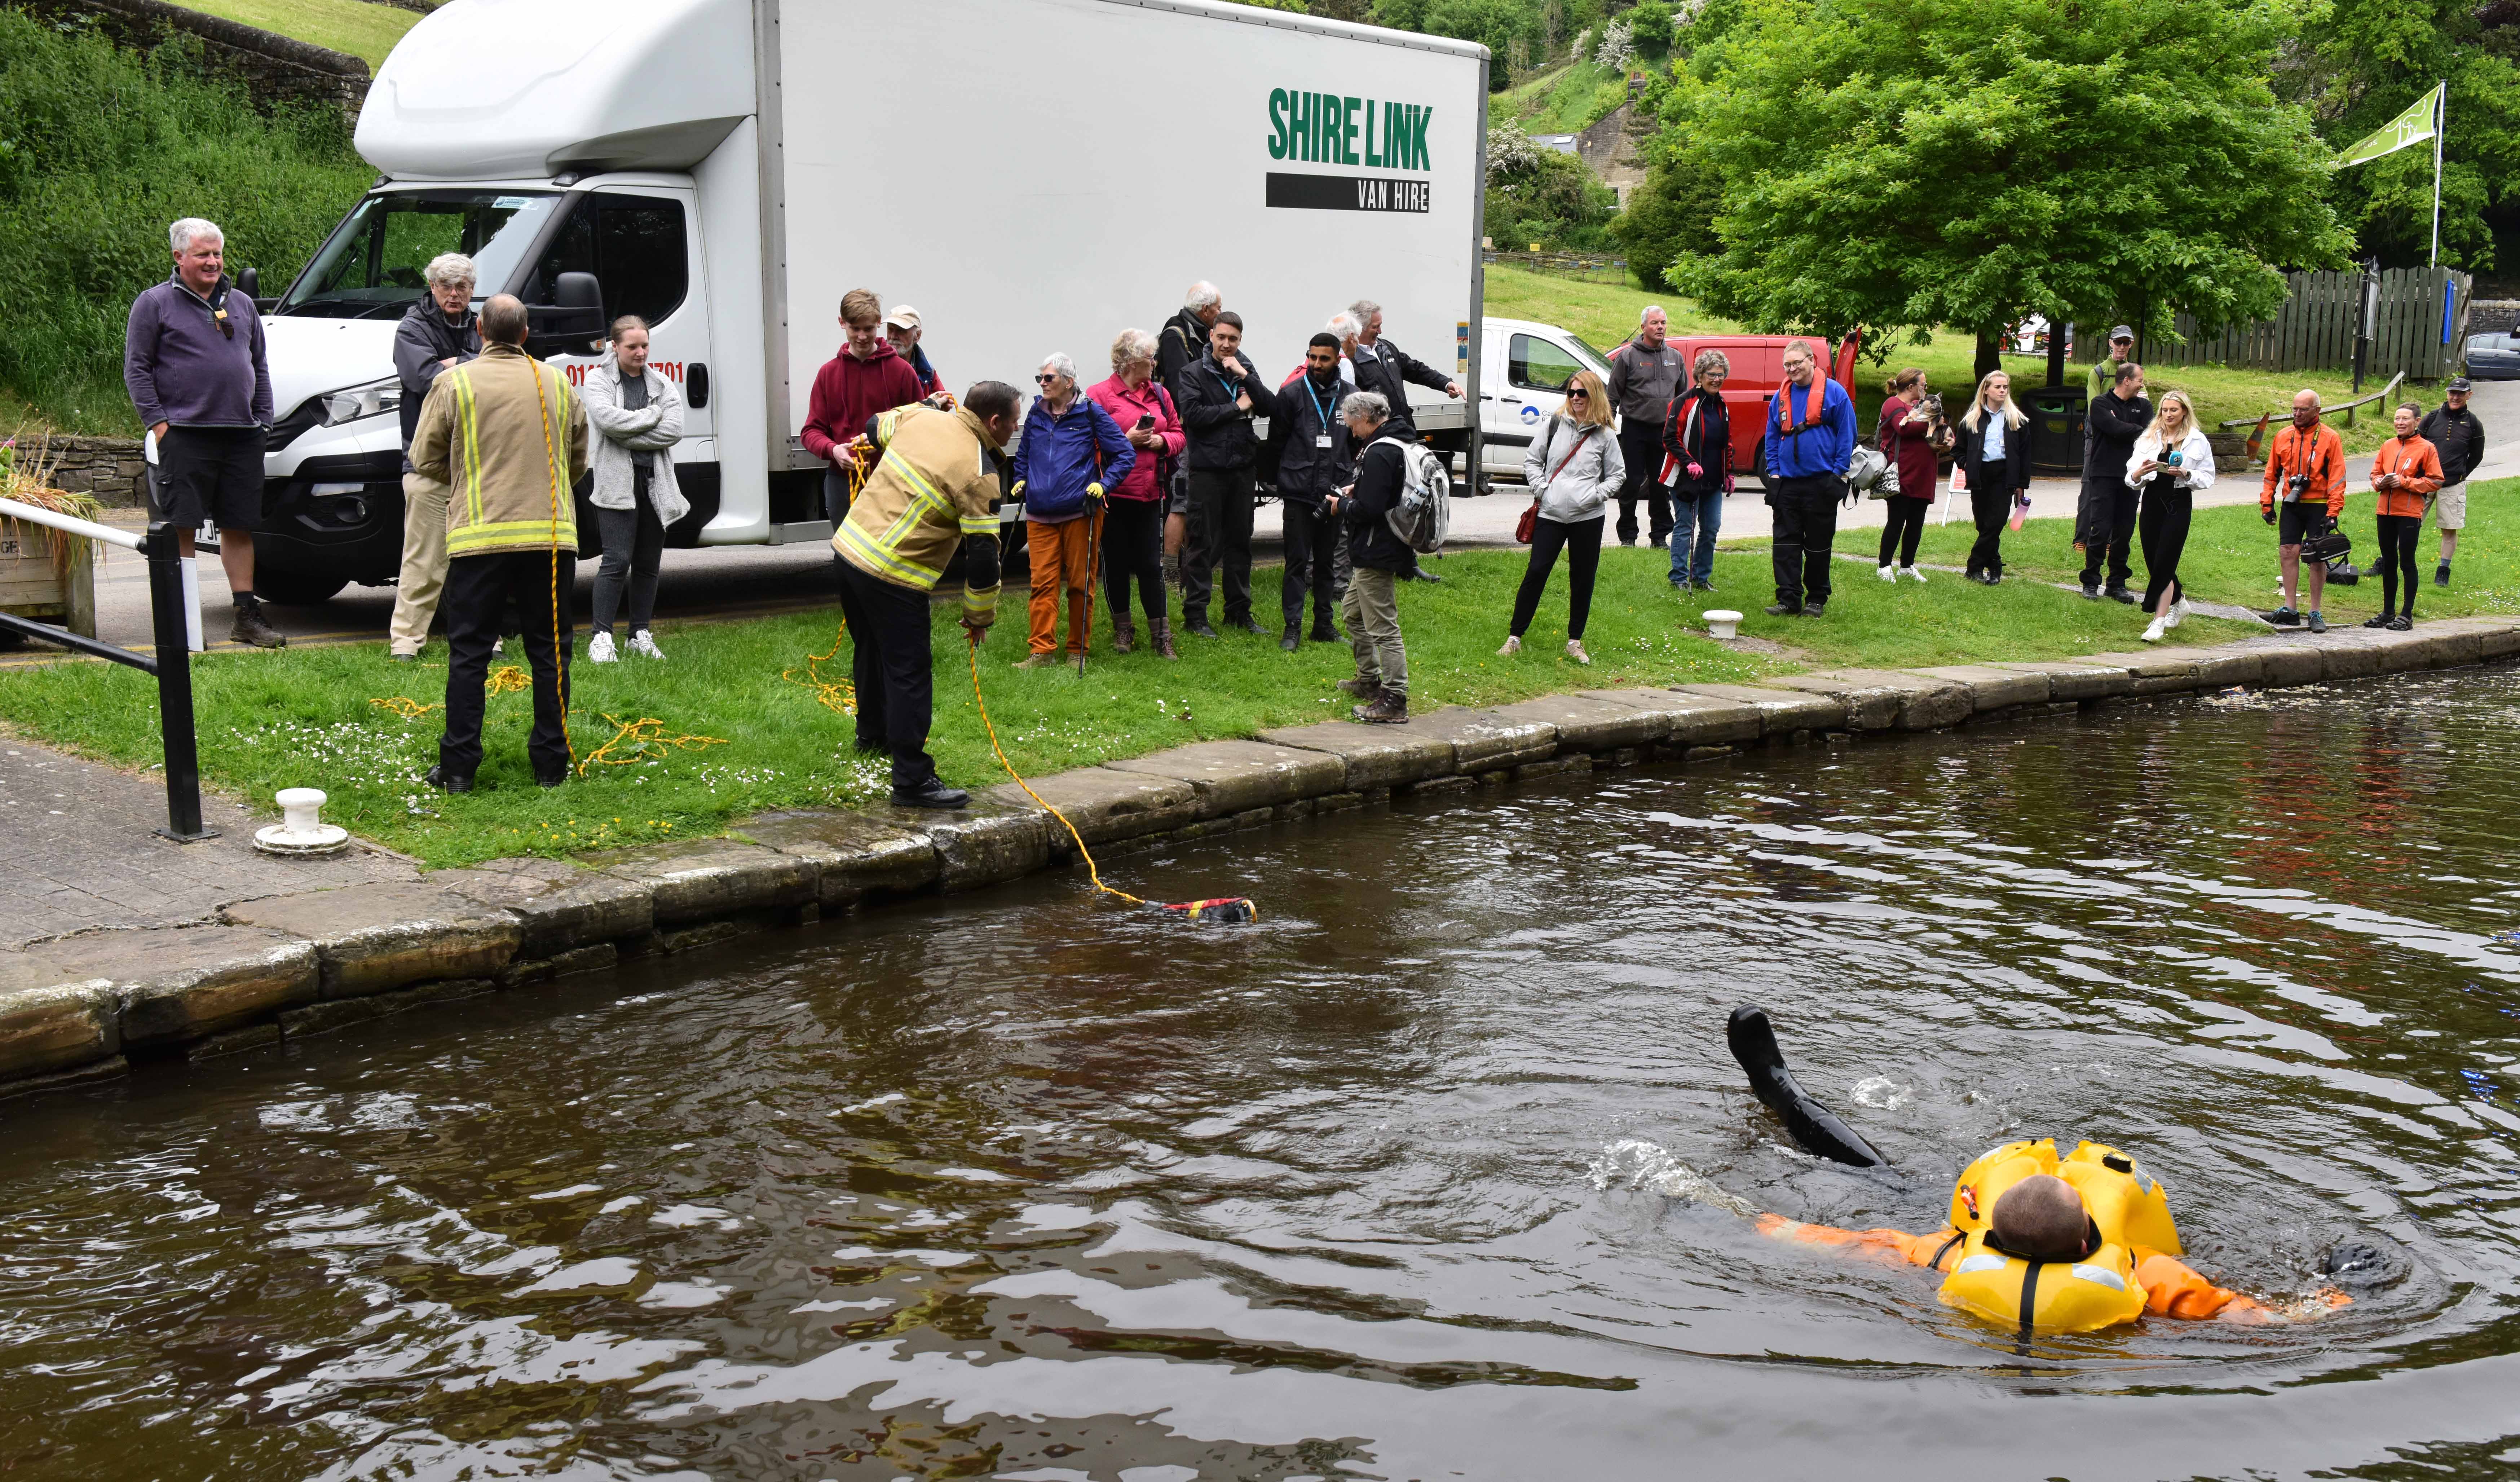 WYFRS staged a scenario for Boat Safety Week 